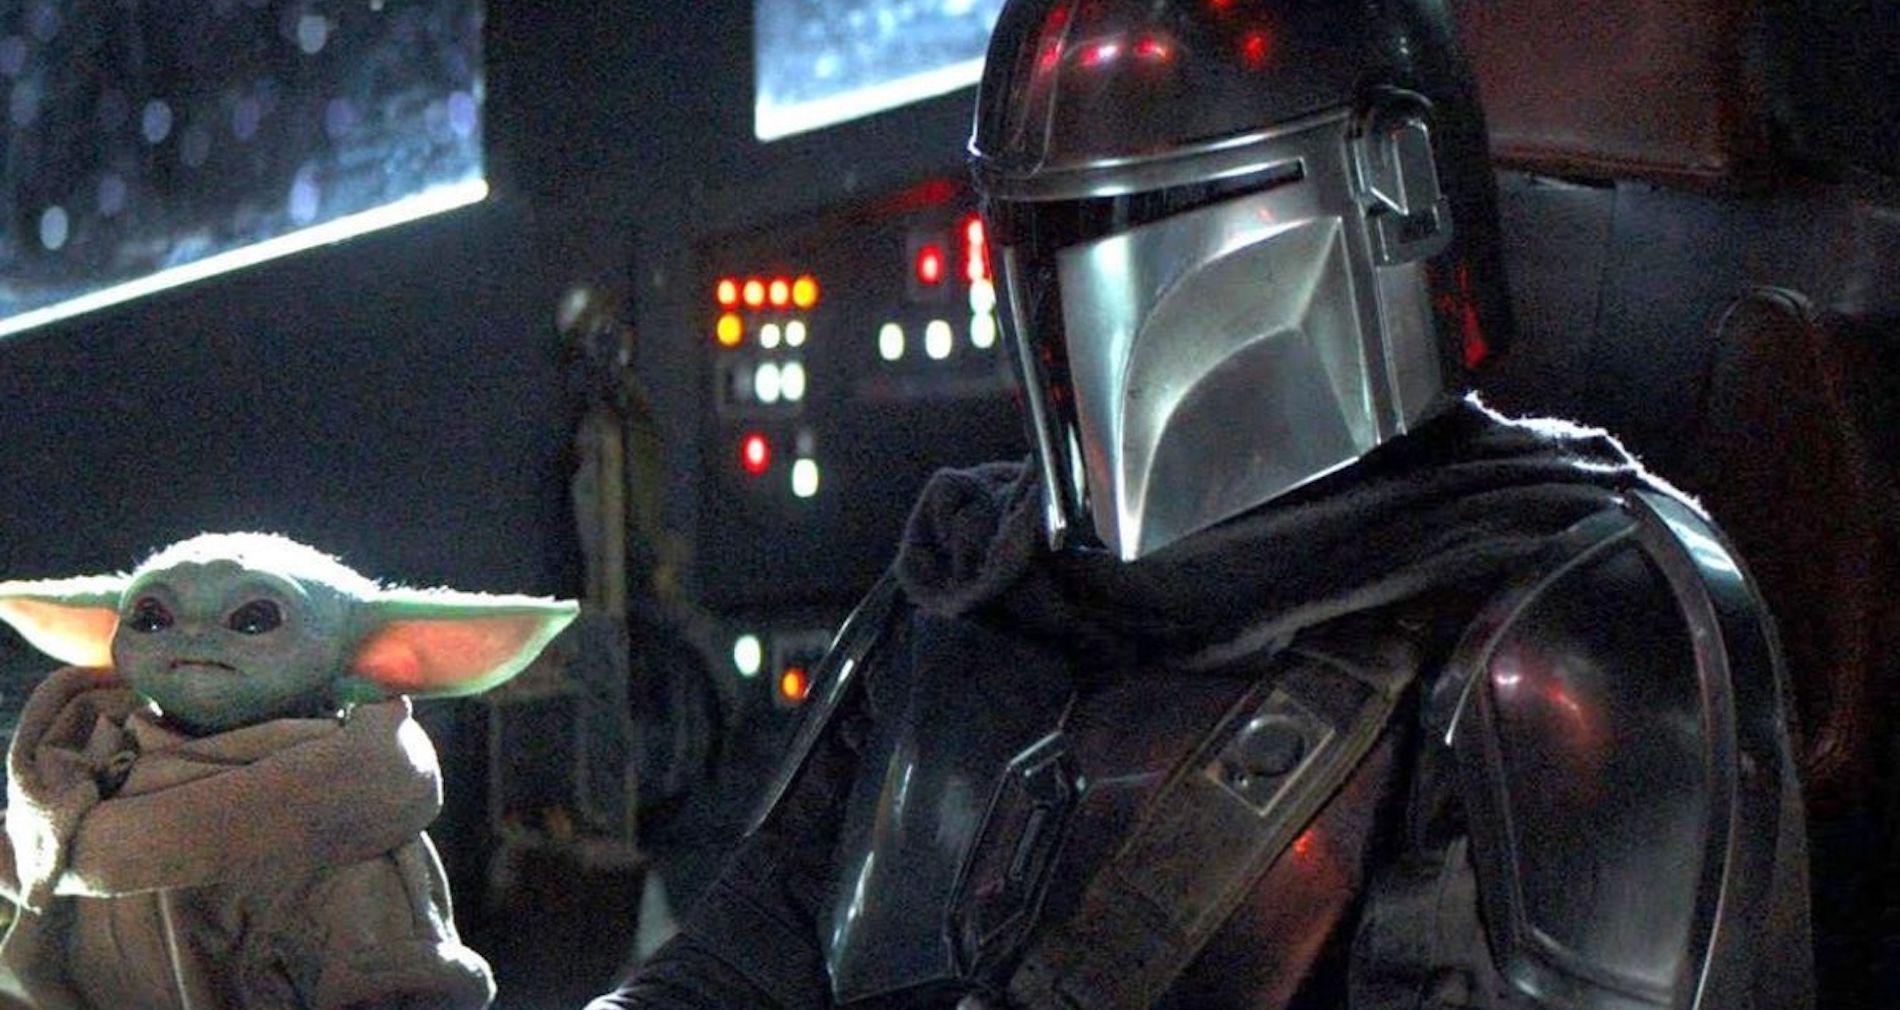 The Mandalorian is currently set for an October release date on Disney Plus.